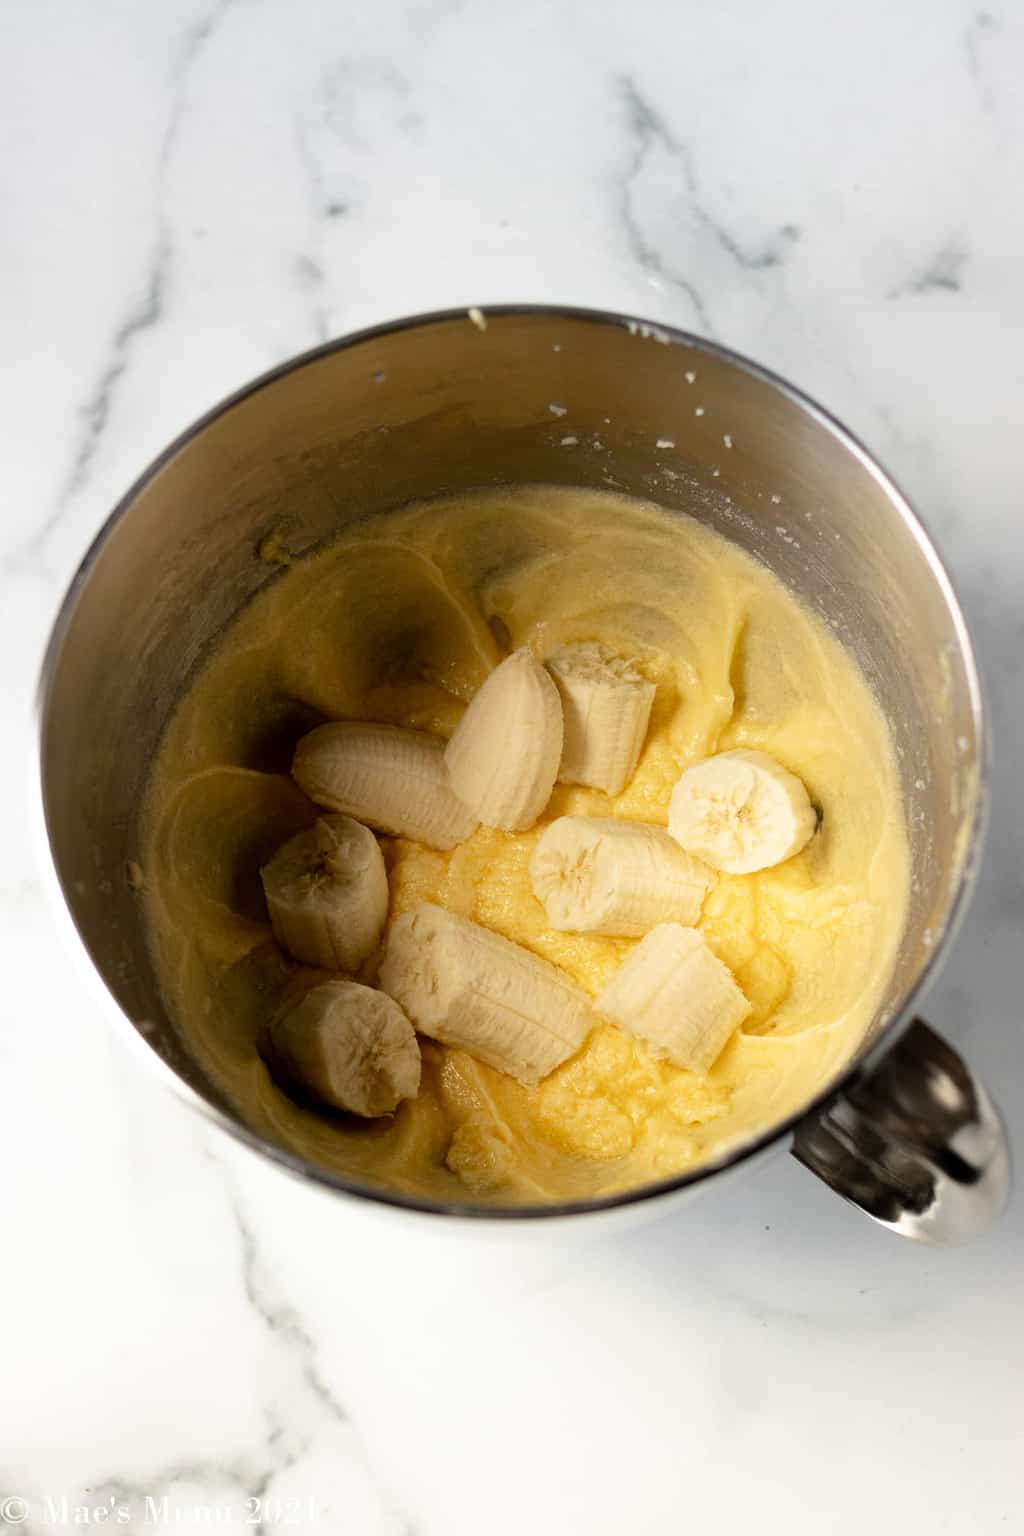 A mixing bowl with creamed butter and sugar and bananas